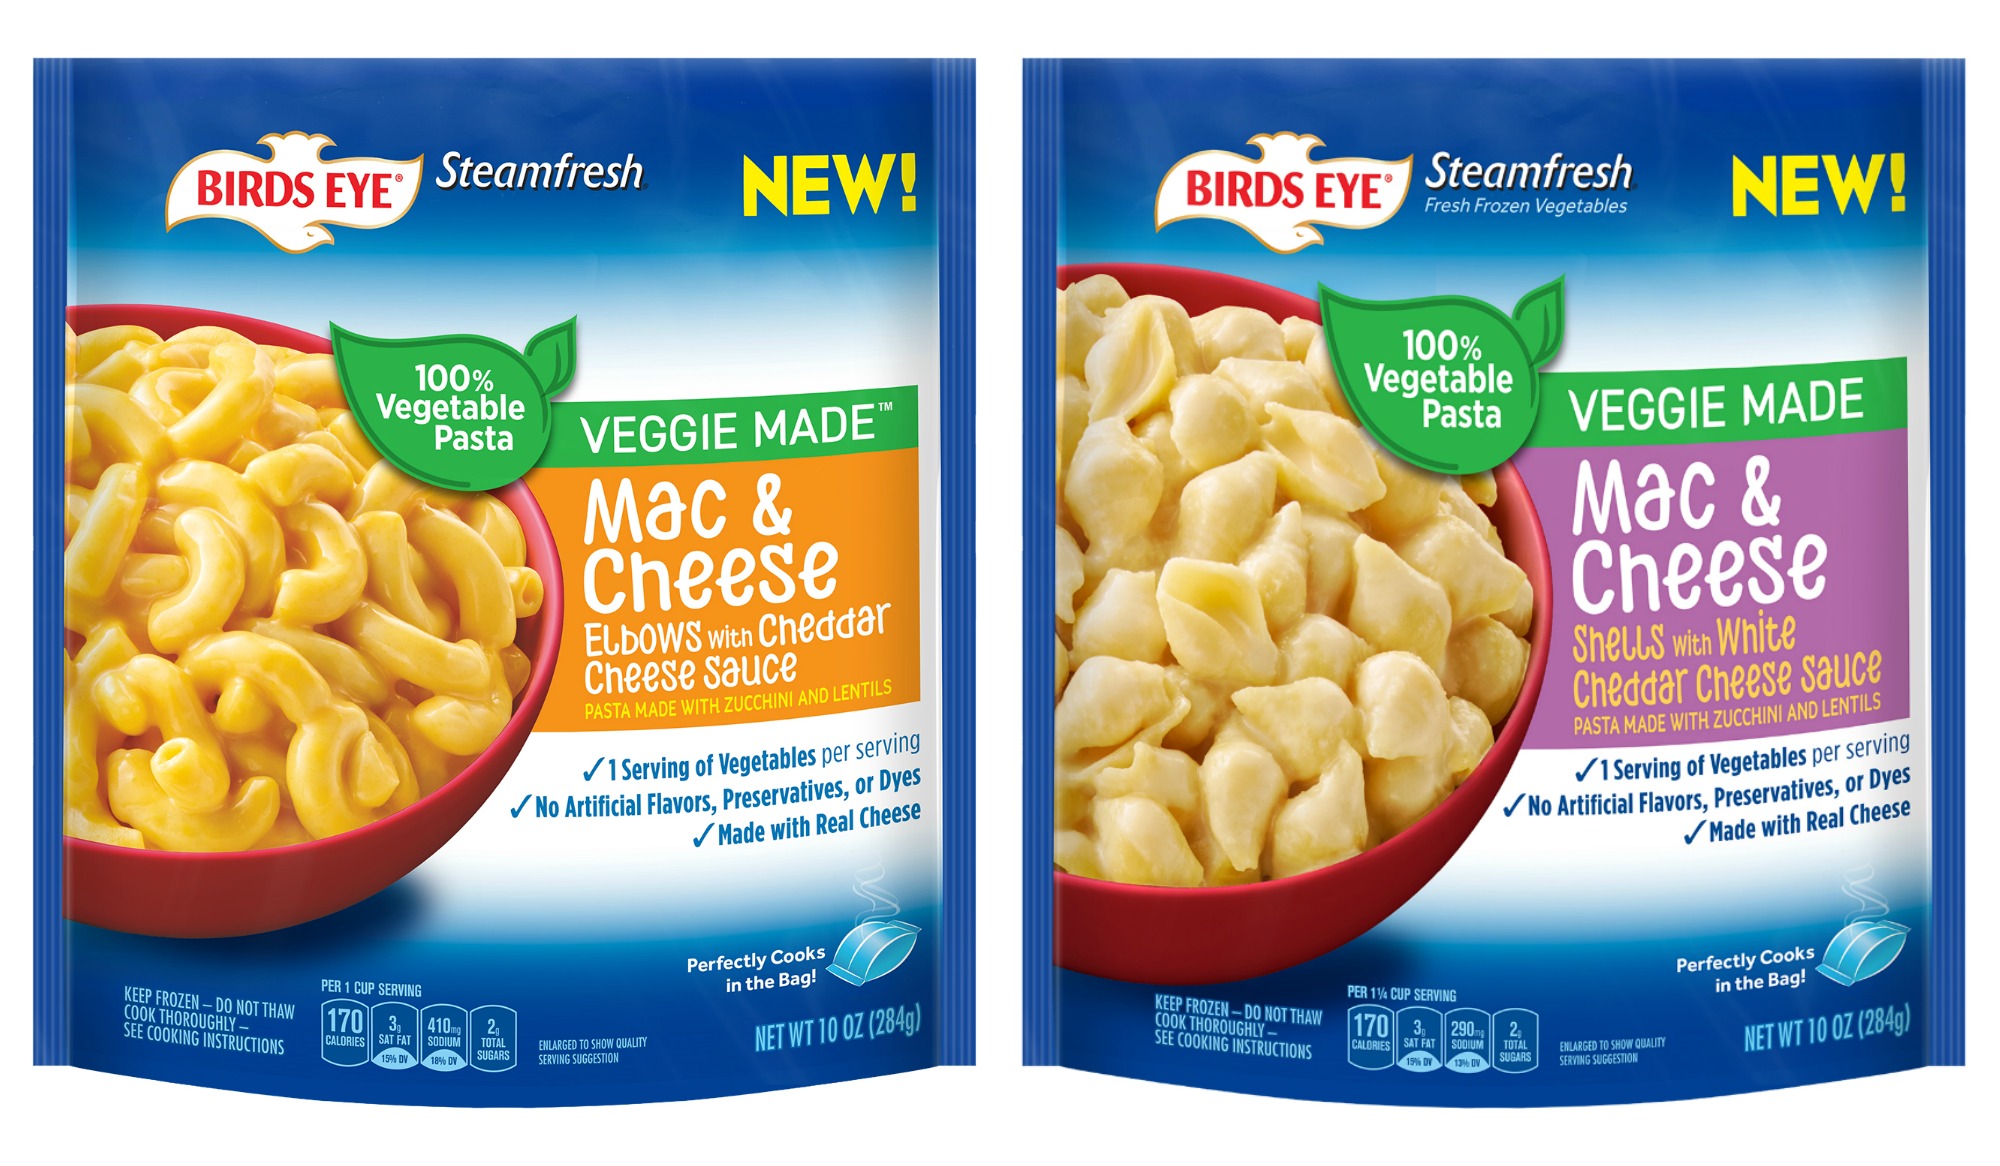 Try New Birds Eye Oven Roasters and Mac & Cheese & Save At Publix on I Heart Publix 1